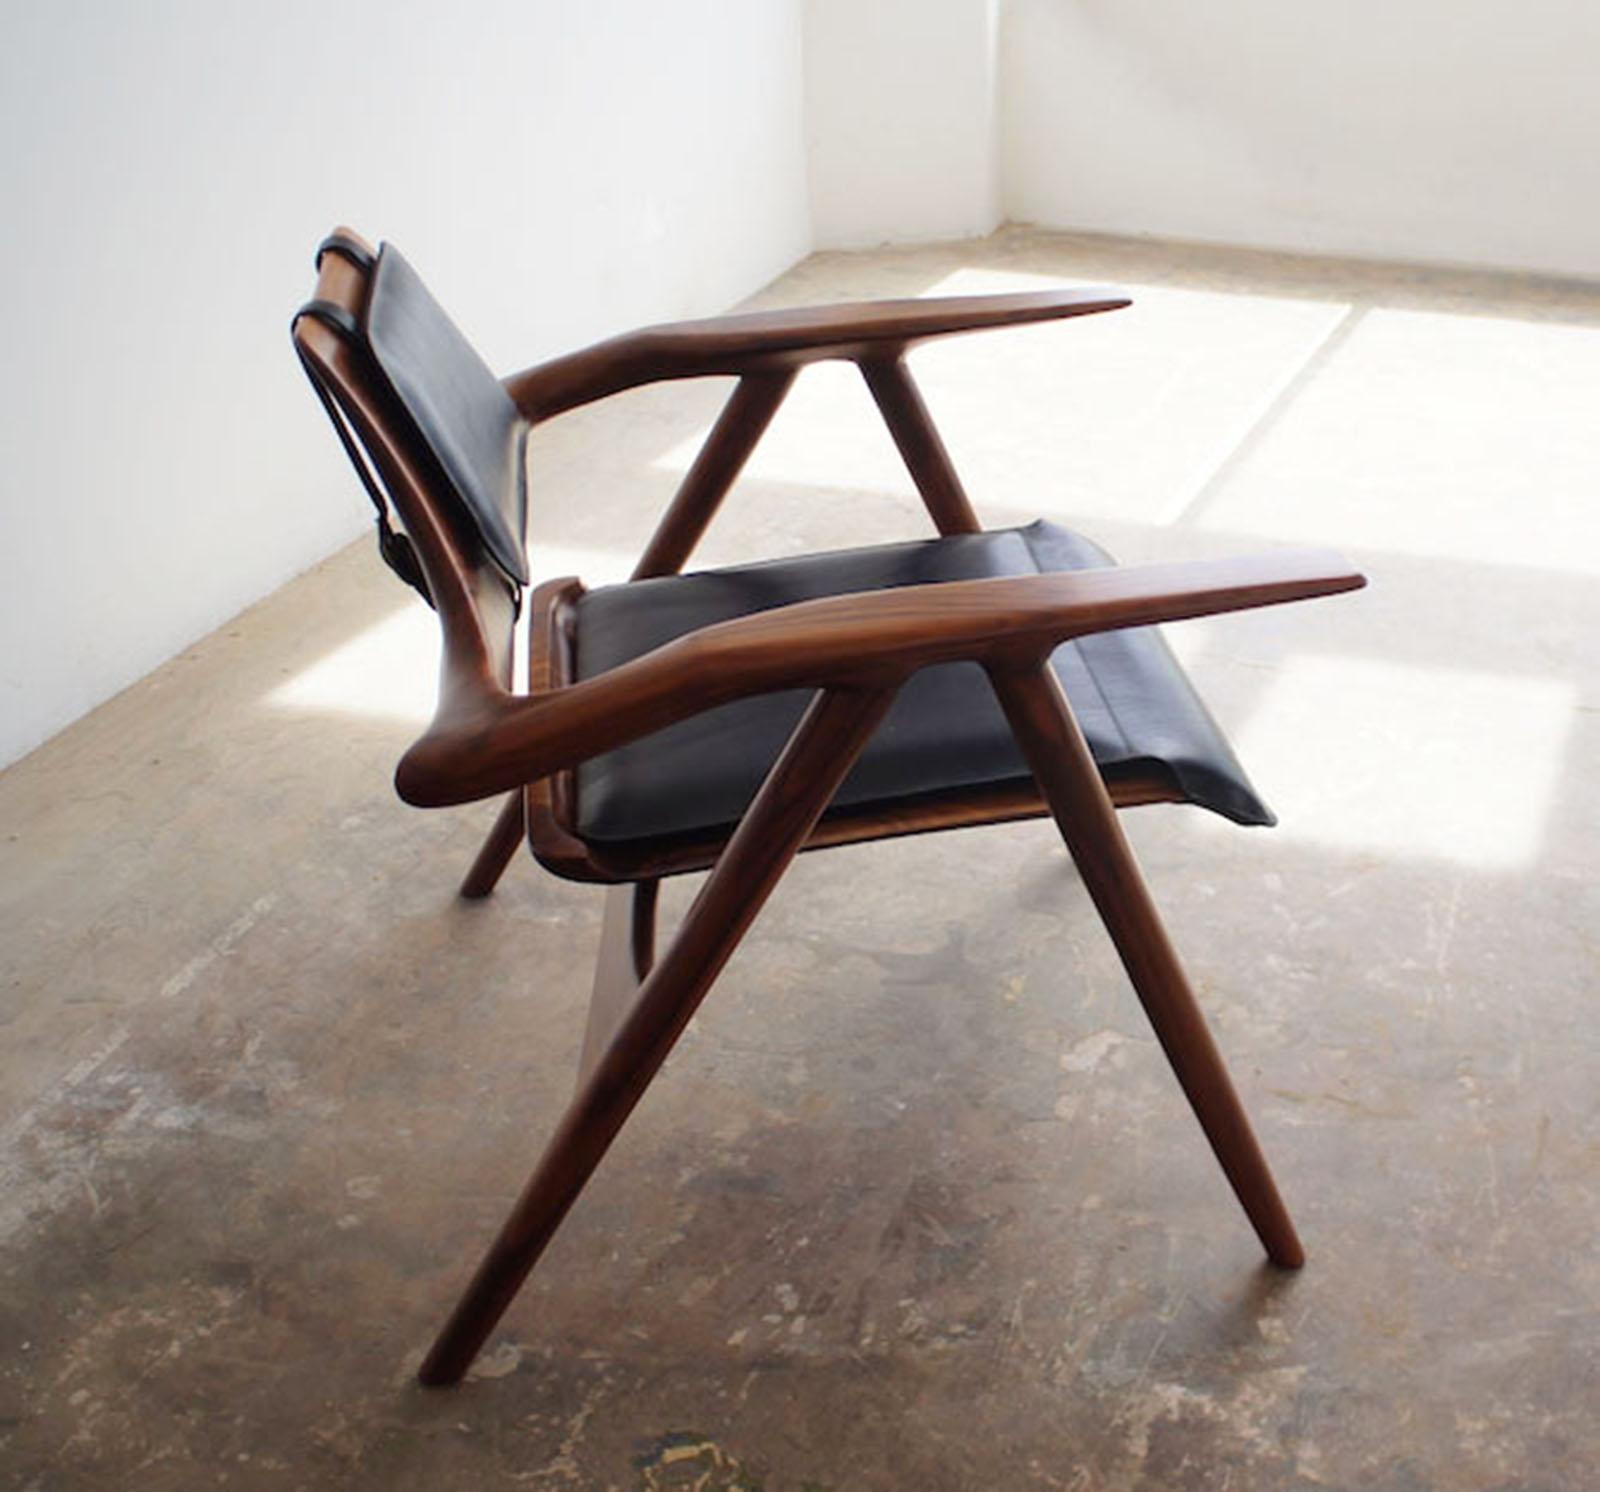 Mantis Chair in Walnut Wood, Hand-Sculpted Chair by Kokora For Sale 3